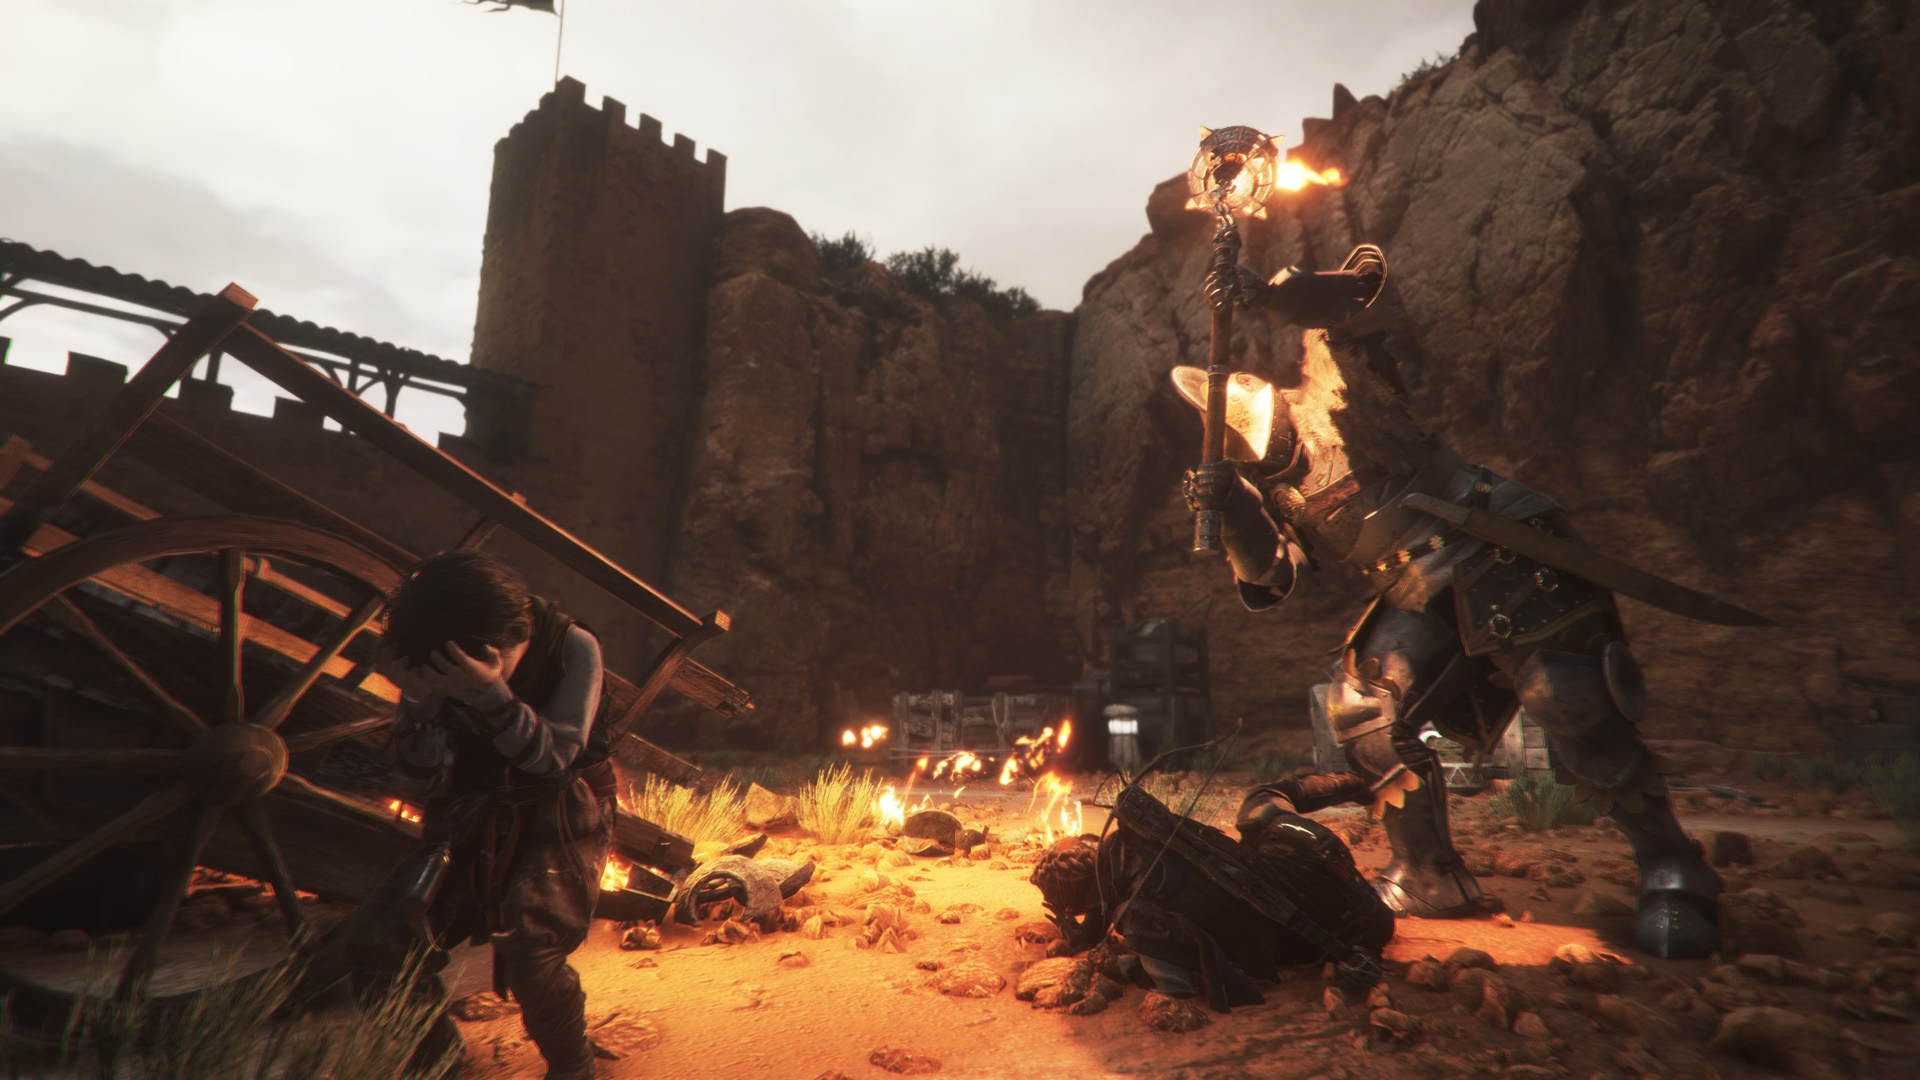 A Plague Tale: Requiem — How to Defeat Armored Enemies – GameSkinny